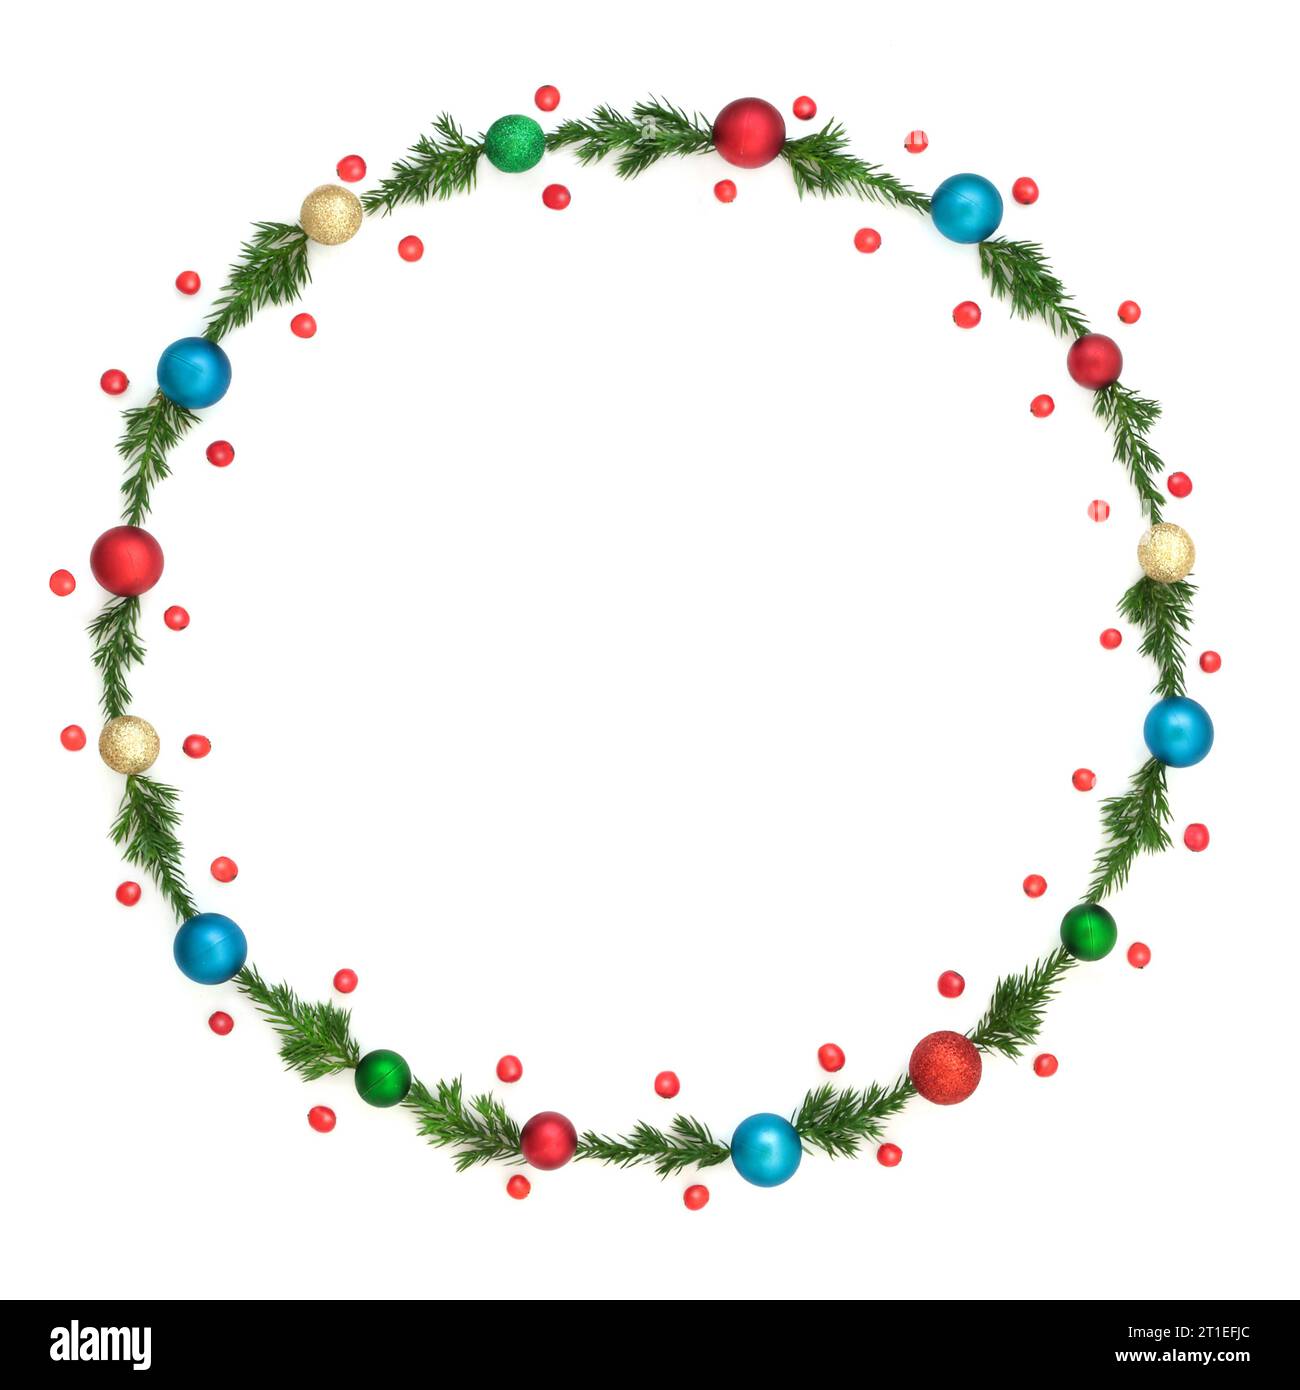 Christmas red gold and blue bauble juniper fir and holly berry winter wreath decoration. Minimal Xmas, Noel, Yule frame design for card, invitation. Stock Photo